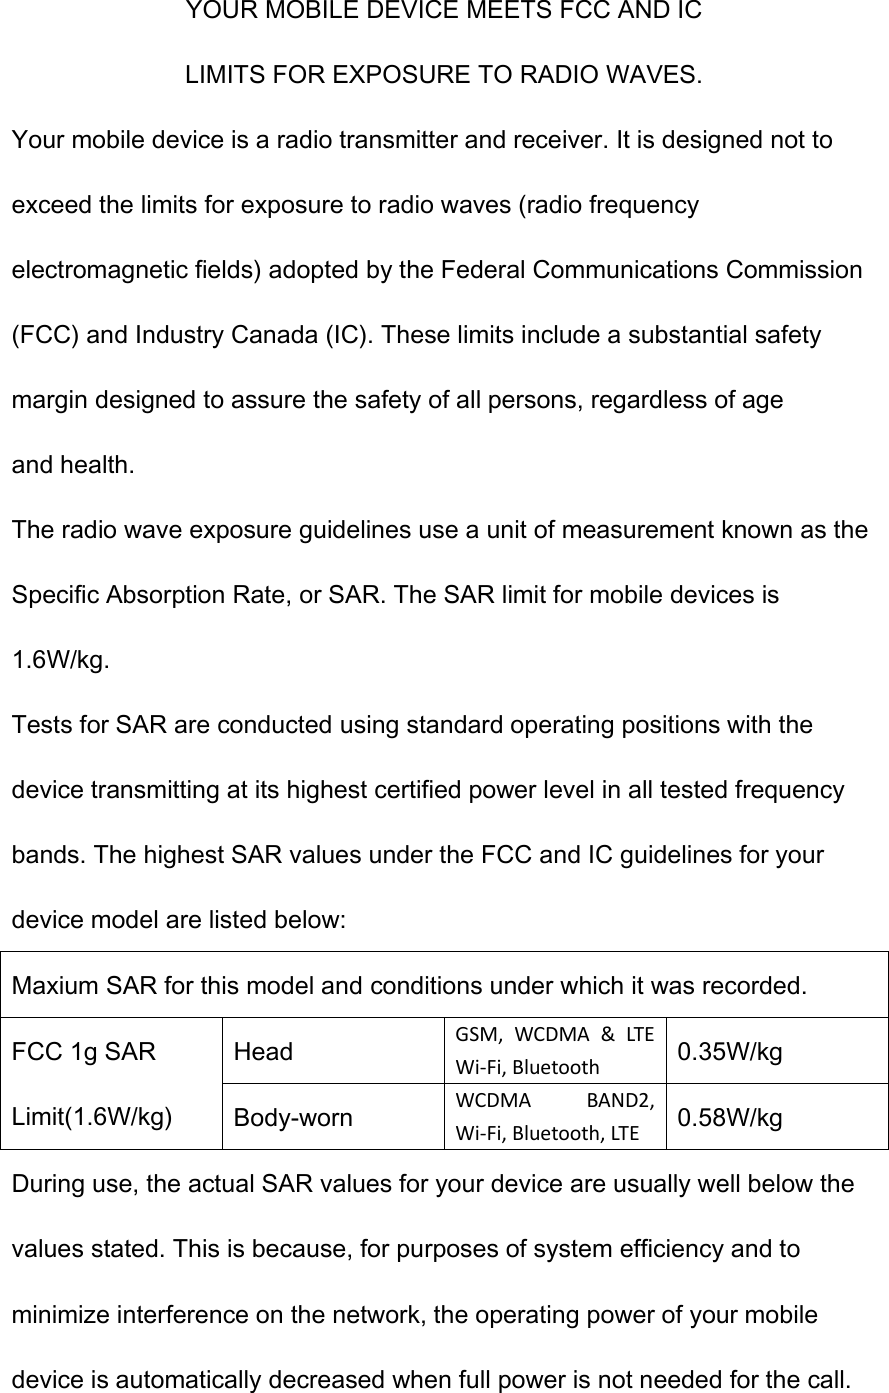 YOUR MOBILE DEVICE MEETS FCC AND IC LIMITS FOR EXPOSURE TO RADIO WAVES. Your mobile device is a radio transmitter and receiver. It is designed not to exceed the limits for exposure to radio waves (radio frequency electromagnetic fields) adopted by the Federal Communications Commission (FCC) and Industry Canada (IC). These limits include a substantial safety margin designed to assure the safety of all persons, regardless of age and health. The radio wave exposure guidelines use a unit of measurement known as the Specific Absorption Rate, or SAR. The SAR limit for mobile devices is 1.6W/kg. Tests for SAR are conducted using standard operating positions with the device transmitting at its highest certified power level in all tested frequency bands. The highest SAR values under the FCC and IC guidelines for your device model are listed below: Maxium SAR for this model and conditions under which it was recorded. FCC 1g SAR Limit(1.6W/kg) Head GSM,  WCDMA  &amp;  LTE Wi-Fi, Bluetooth 0.35W/kg Body-worn WCDMA  BAND2, Wi-Fi, Bluetooth, LTE 0.58W/kg During use, the actual SAR values for your device are usually well below the values stated. This is because, for purposes of system efficiency and to minimize interference on the network, the operating power of your mobile device is automatically decreased when full power is not needed for the call. 